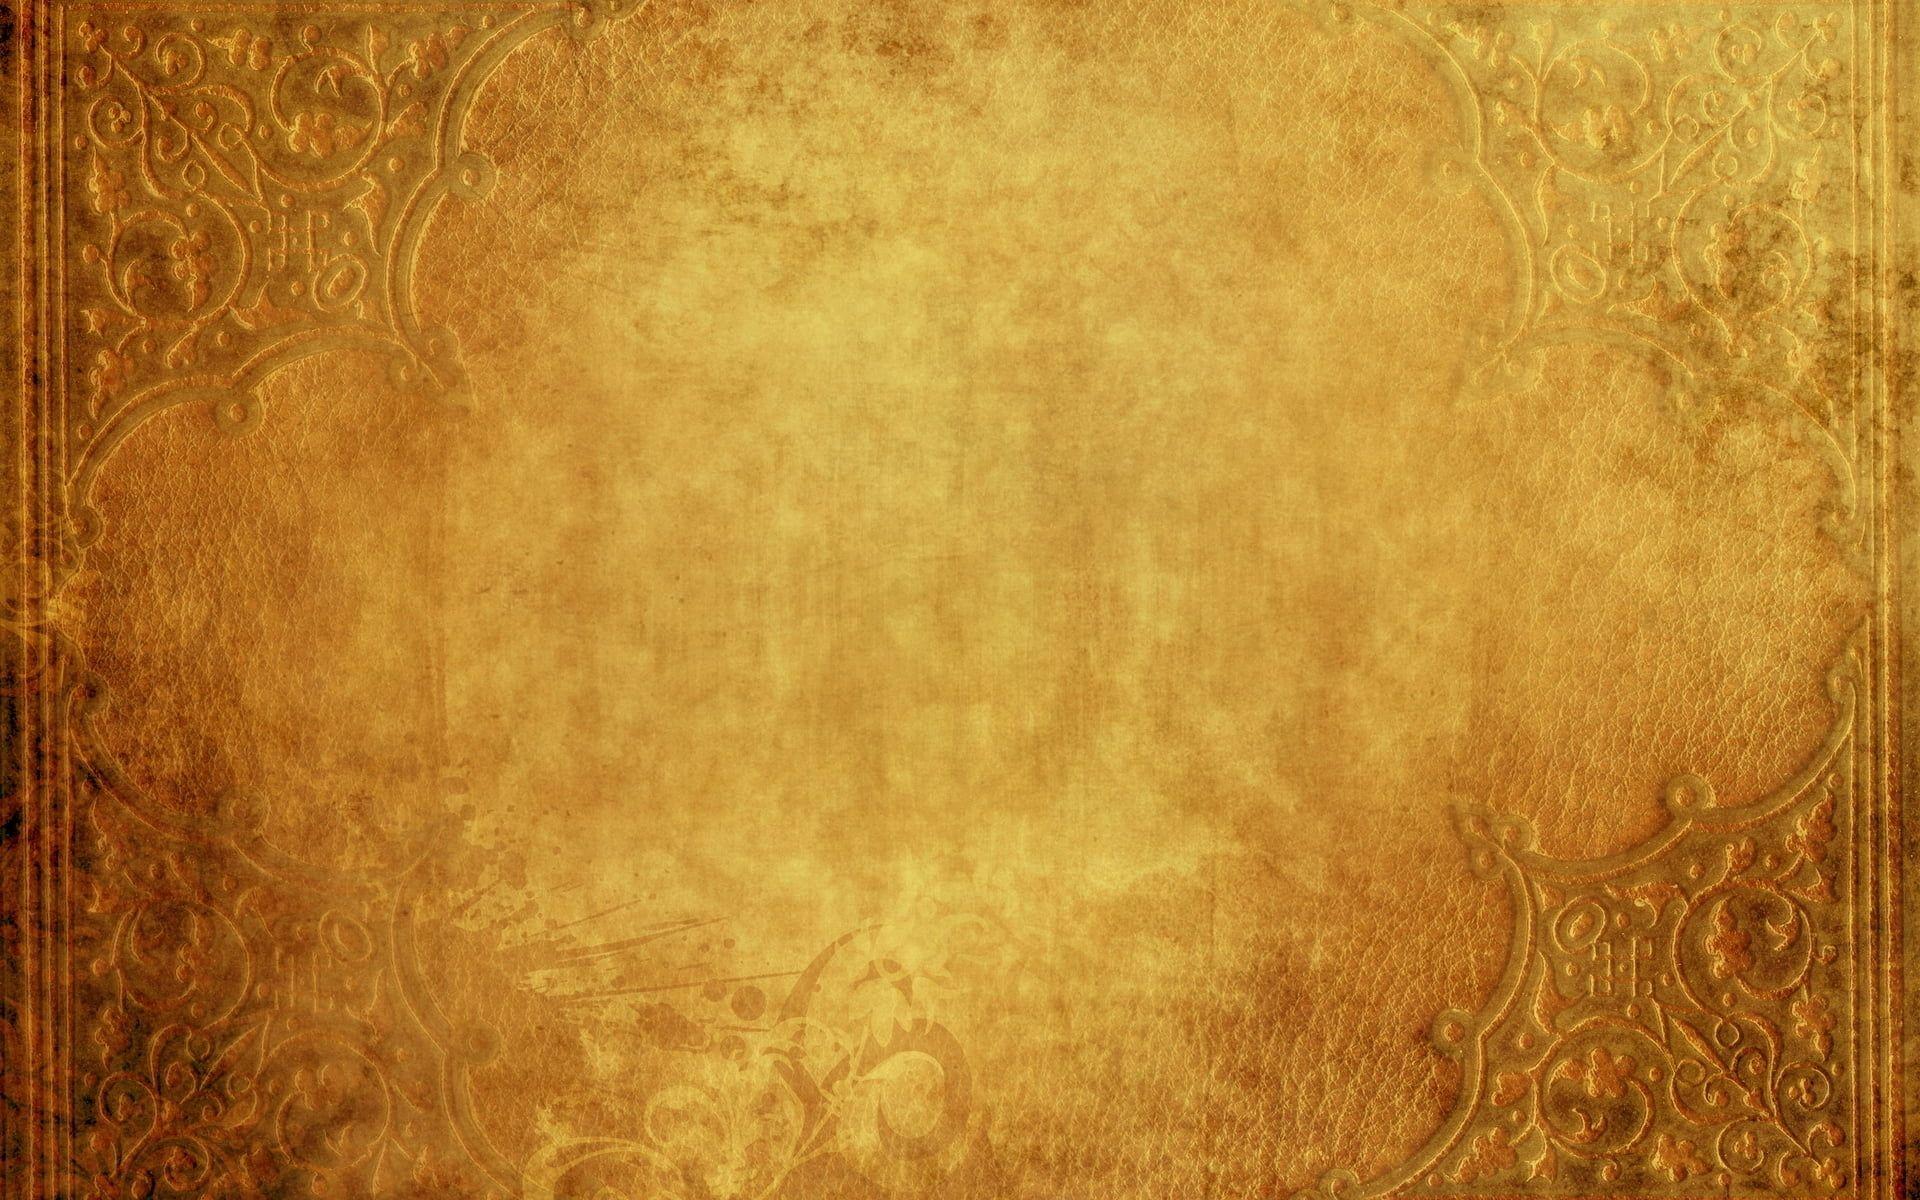 ancient-scroll-background-hd-free-template-ppt-premium-download-2020